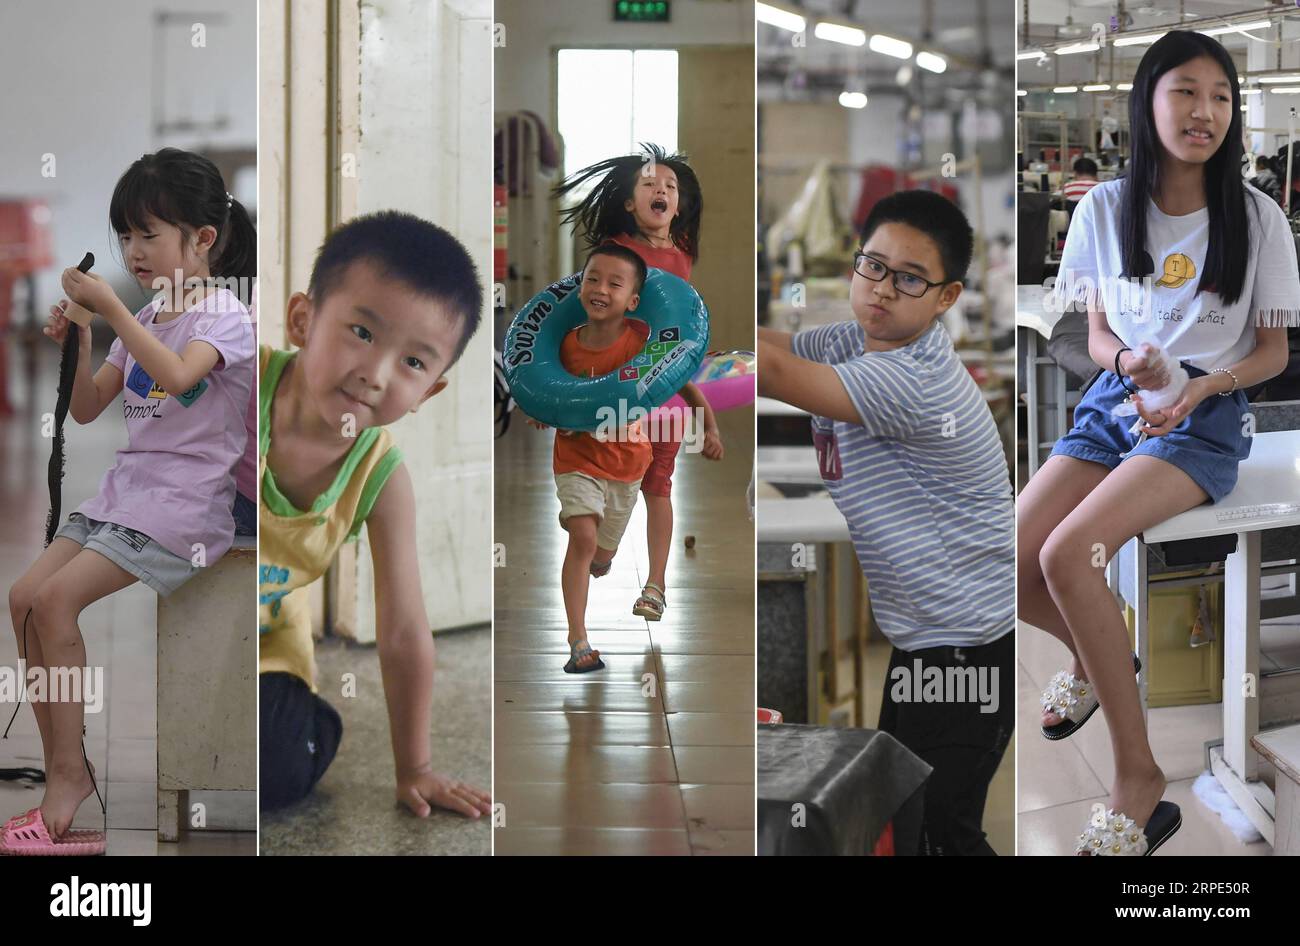 (190818) -- BEIJING, Aug. 18, 2019 -- Undated combo photo shows (L to R) Wang Jingjing in the top class in a kindergarten, Congcong in the middle class in a kindergarten, fourth-grader Lu Changli and first-grader Lu Penghan, sixth-grader Zhang Yu, seventh-grader Liu Lei at the workshop of a clothes factory in Shishi, southeast China s Fujian Province. The scorching heat has been engulfing Shishi of southeast China s Fujian this summer, leaving few walking on the usually-bustling streets. By contrast, clothes factories, which are densely dotted in the city, are crowded with people who have been Stock Photo